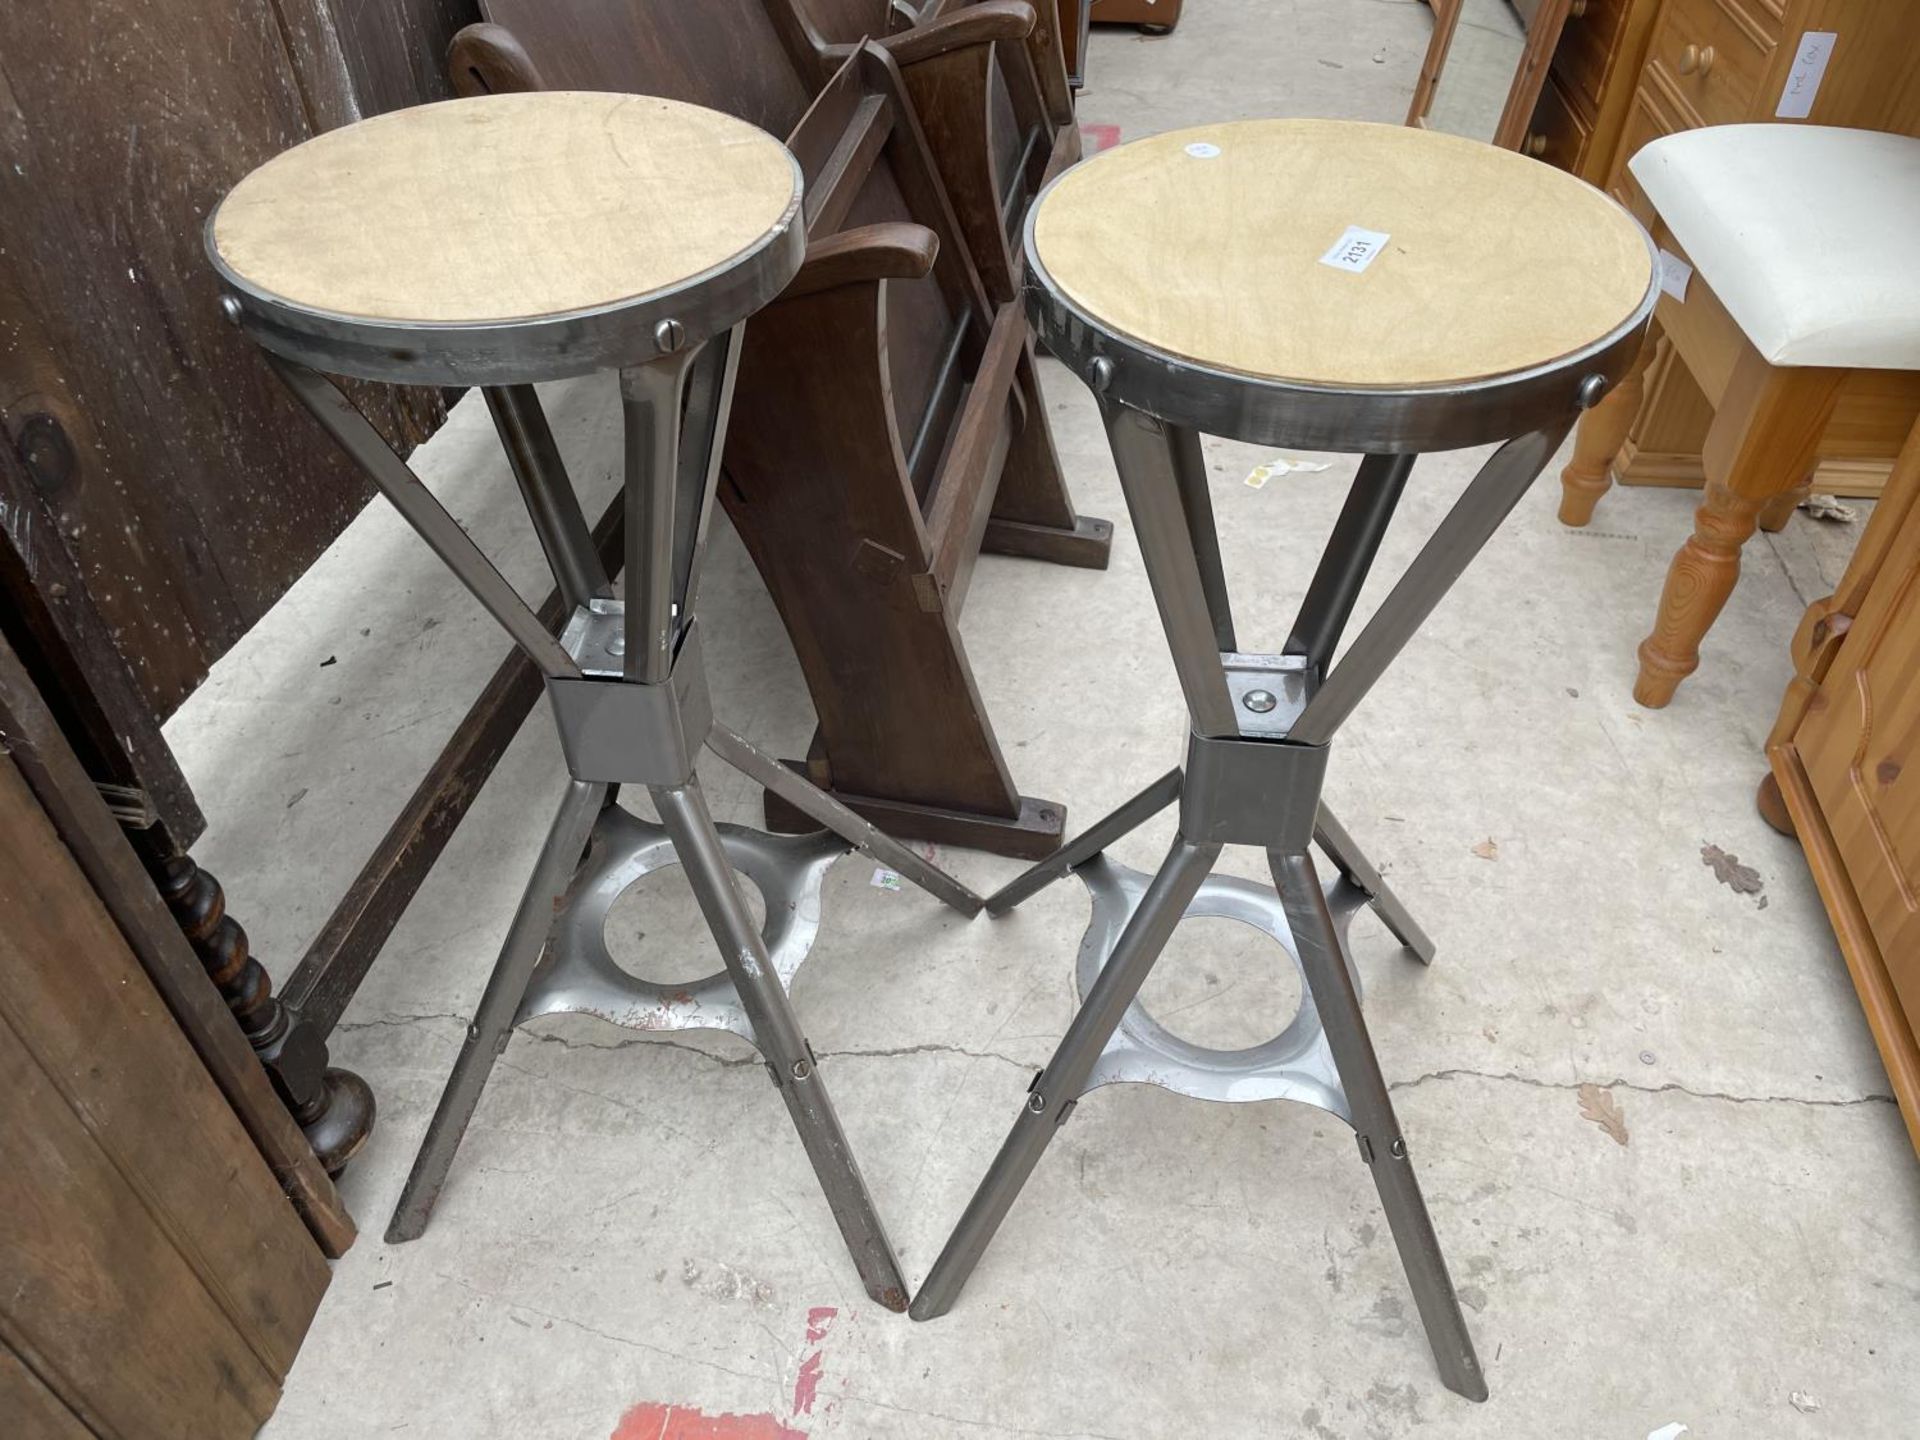 TWO POLISHED METAL INDUSTRIAL STYLE STOOLS H: 30 INCHES